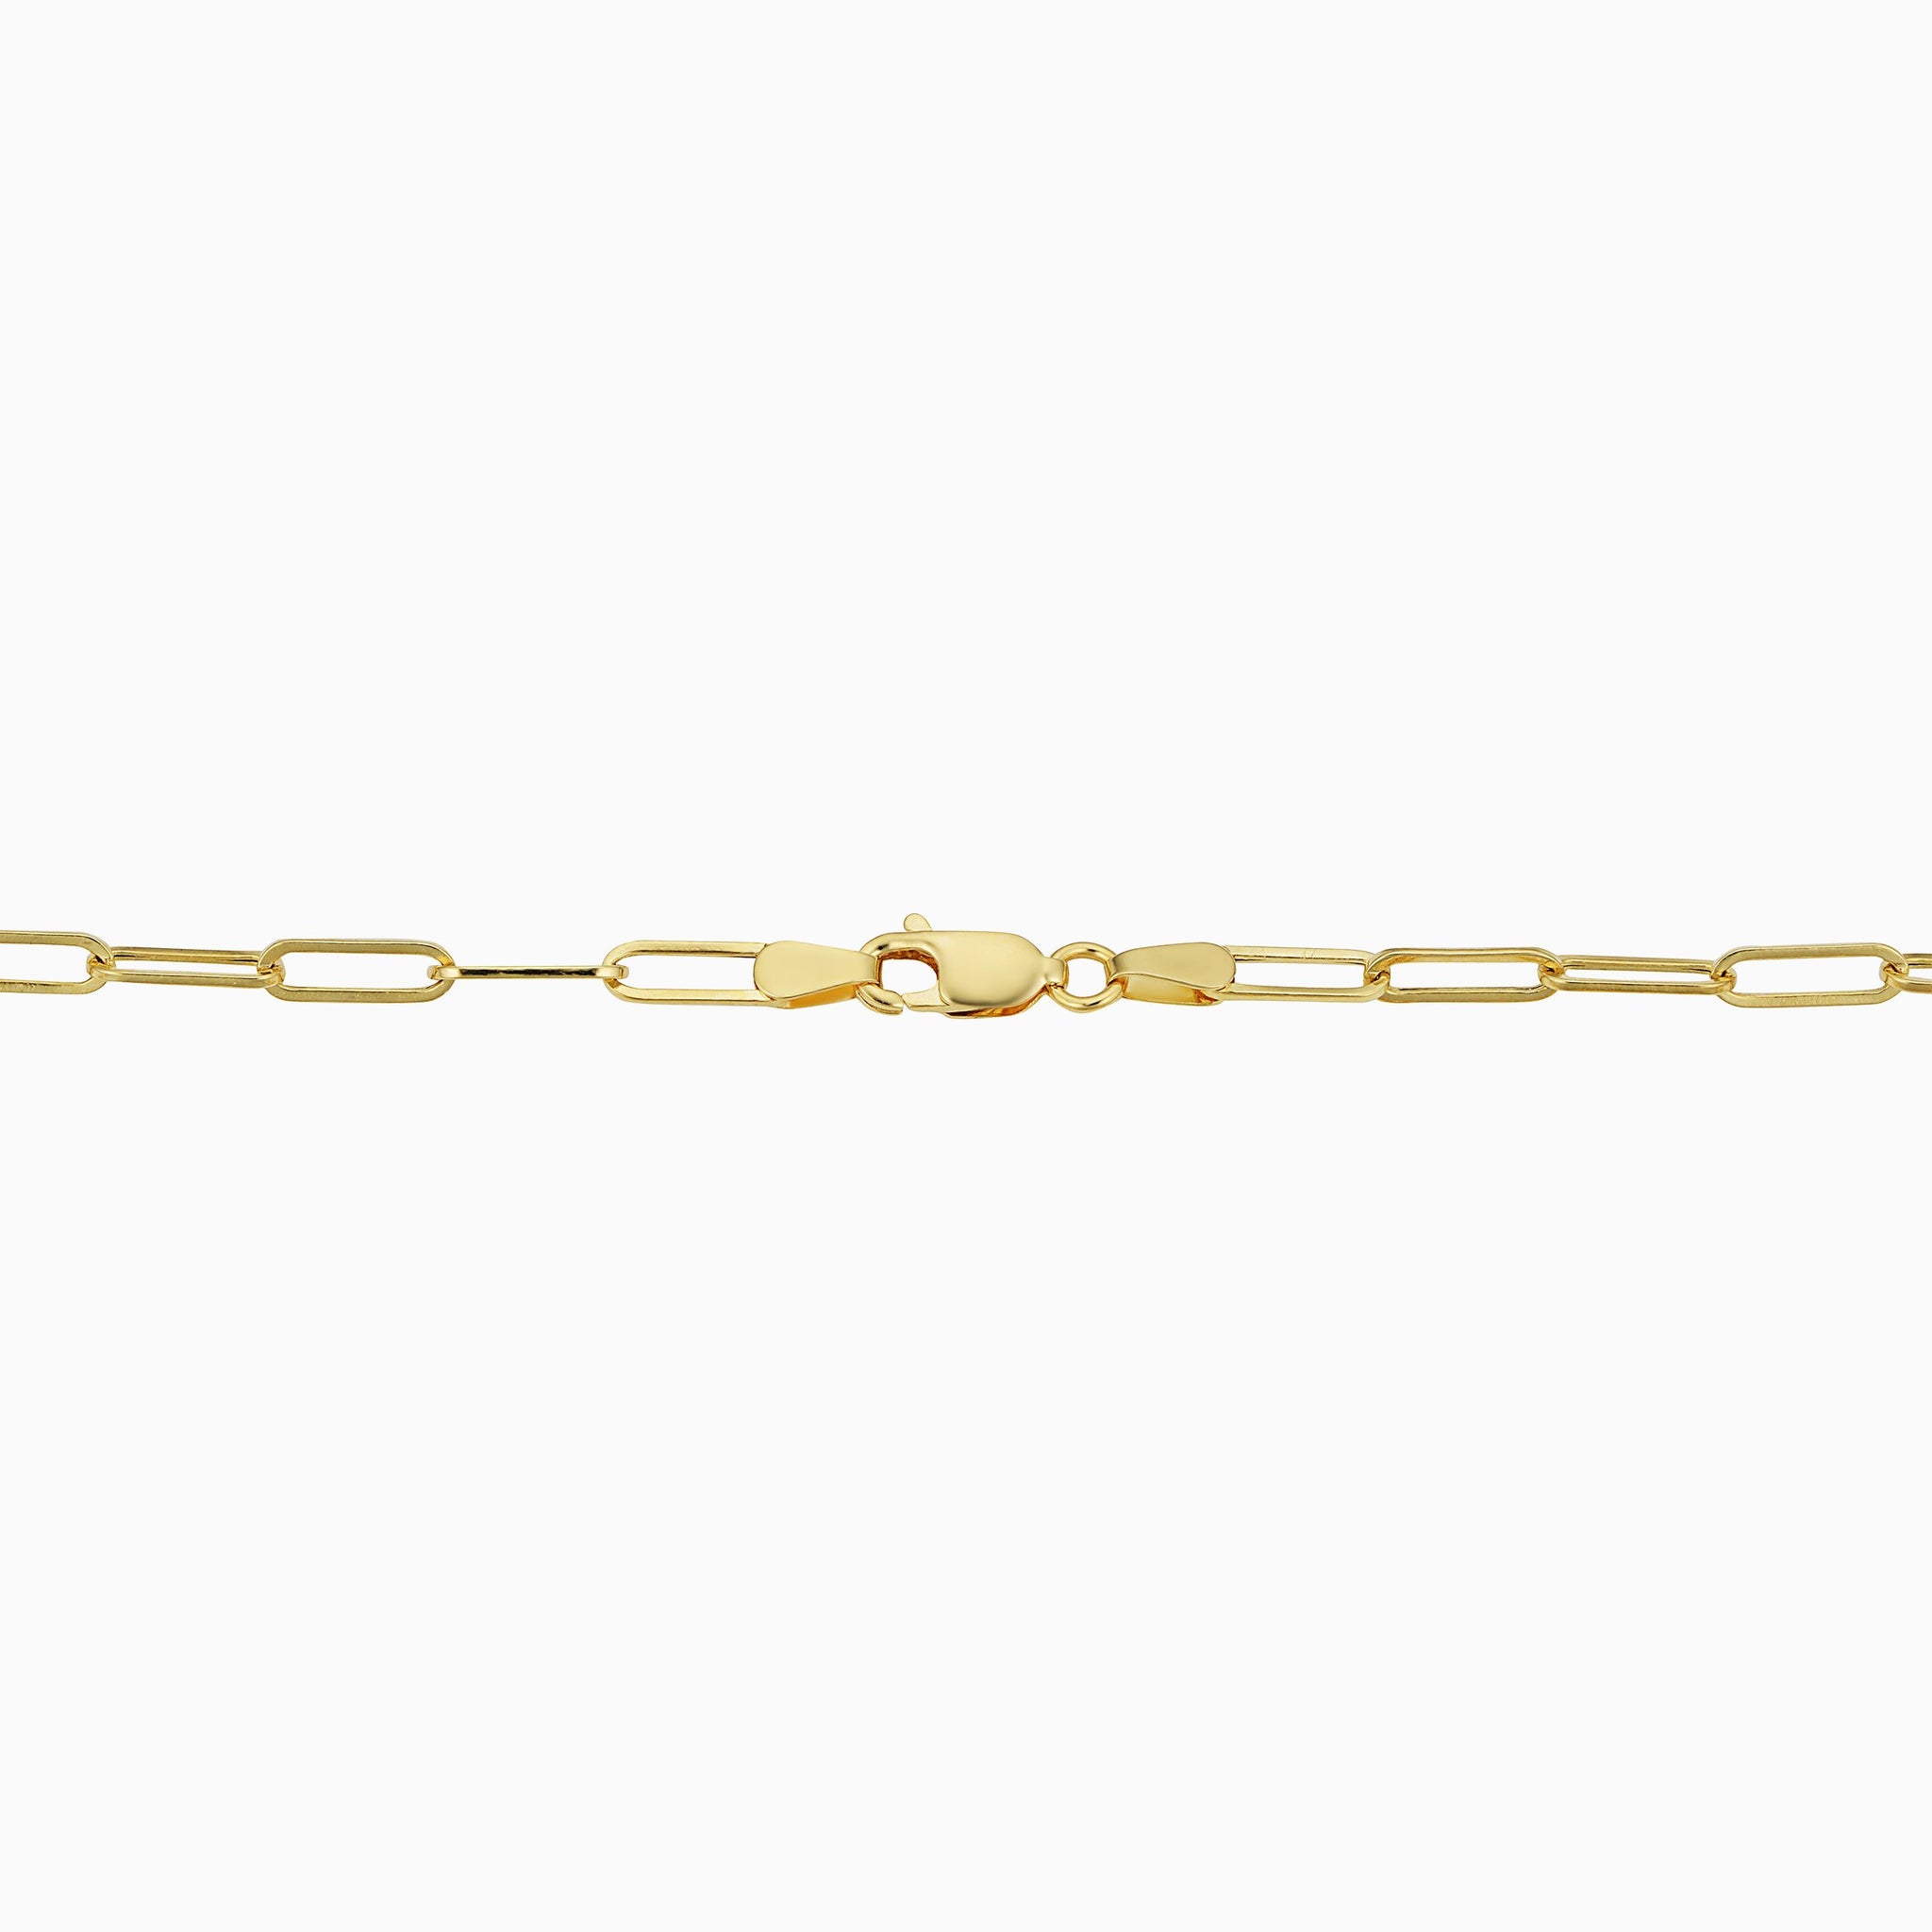 Venice Link Necklace 18 in 18K Yellow Gold - Yellow Gold